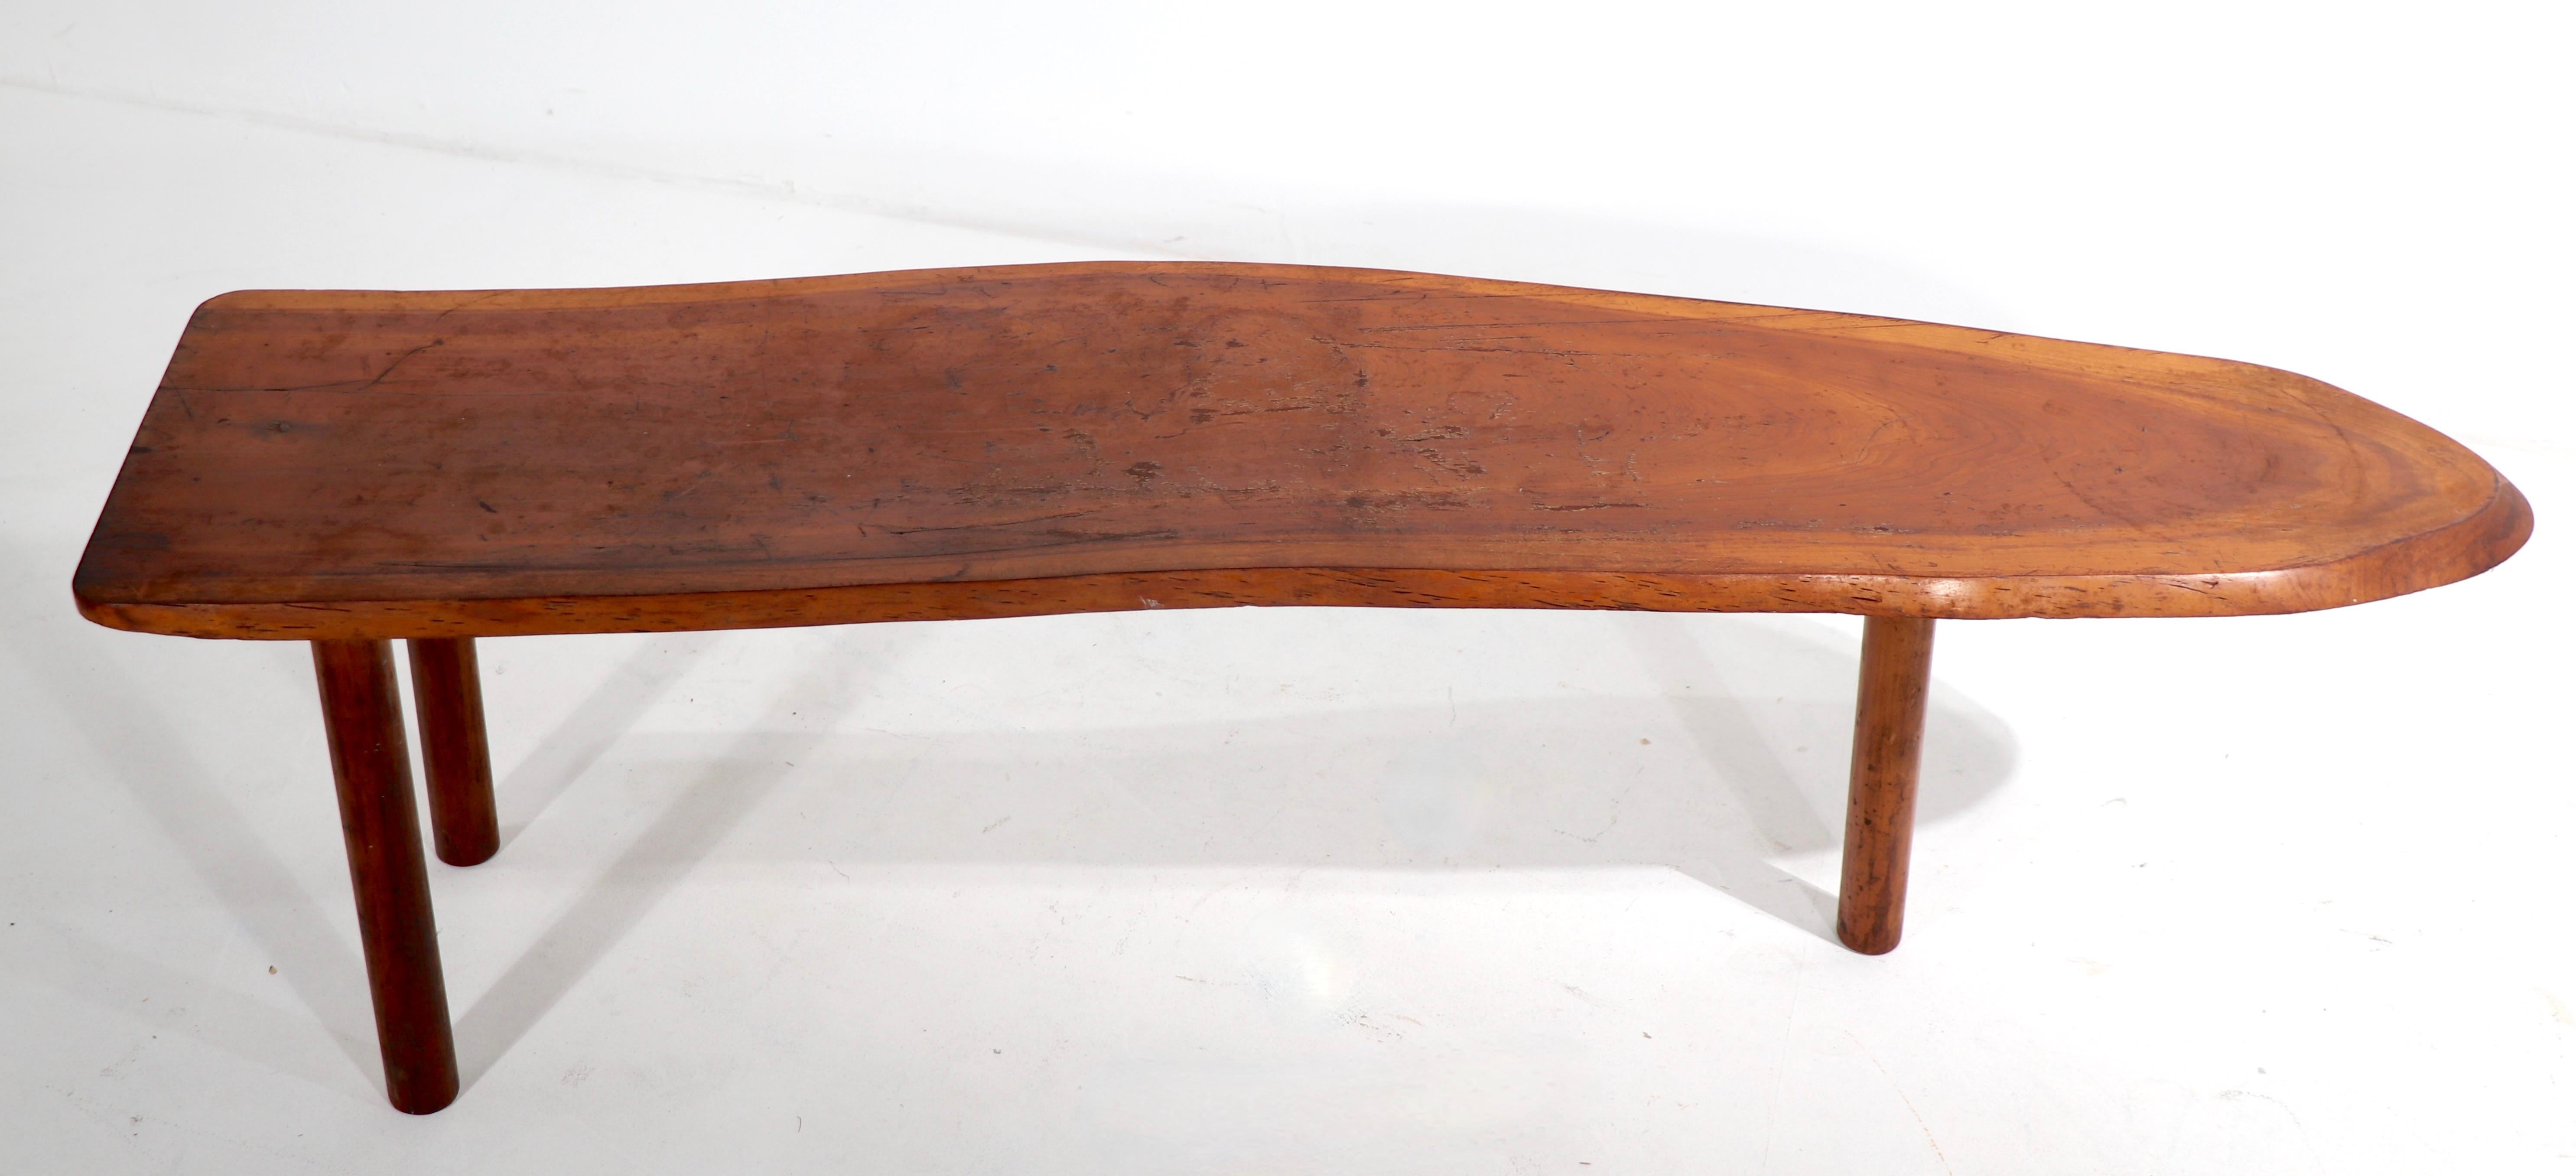 Classic free form, live edge Mid Century Organic Modern coffee table, in the manner of George Nakashima, and Roy Sheldon. The table is structurally sound and sturdy, the top shows cosmetic wear normal and consistent with age.